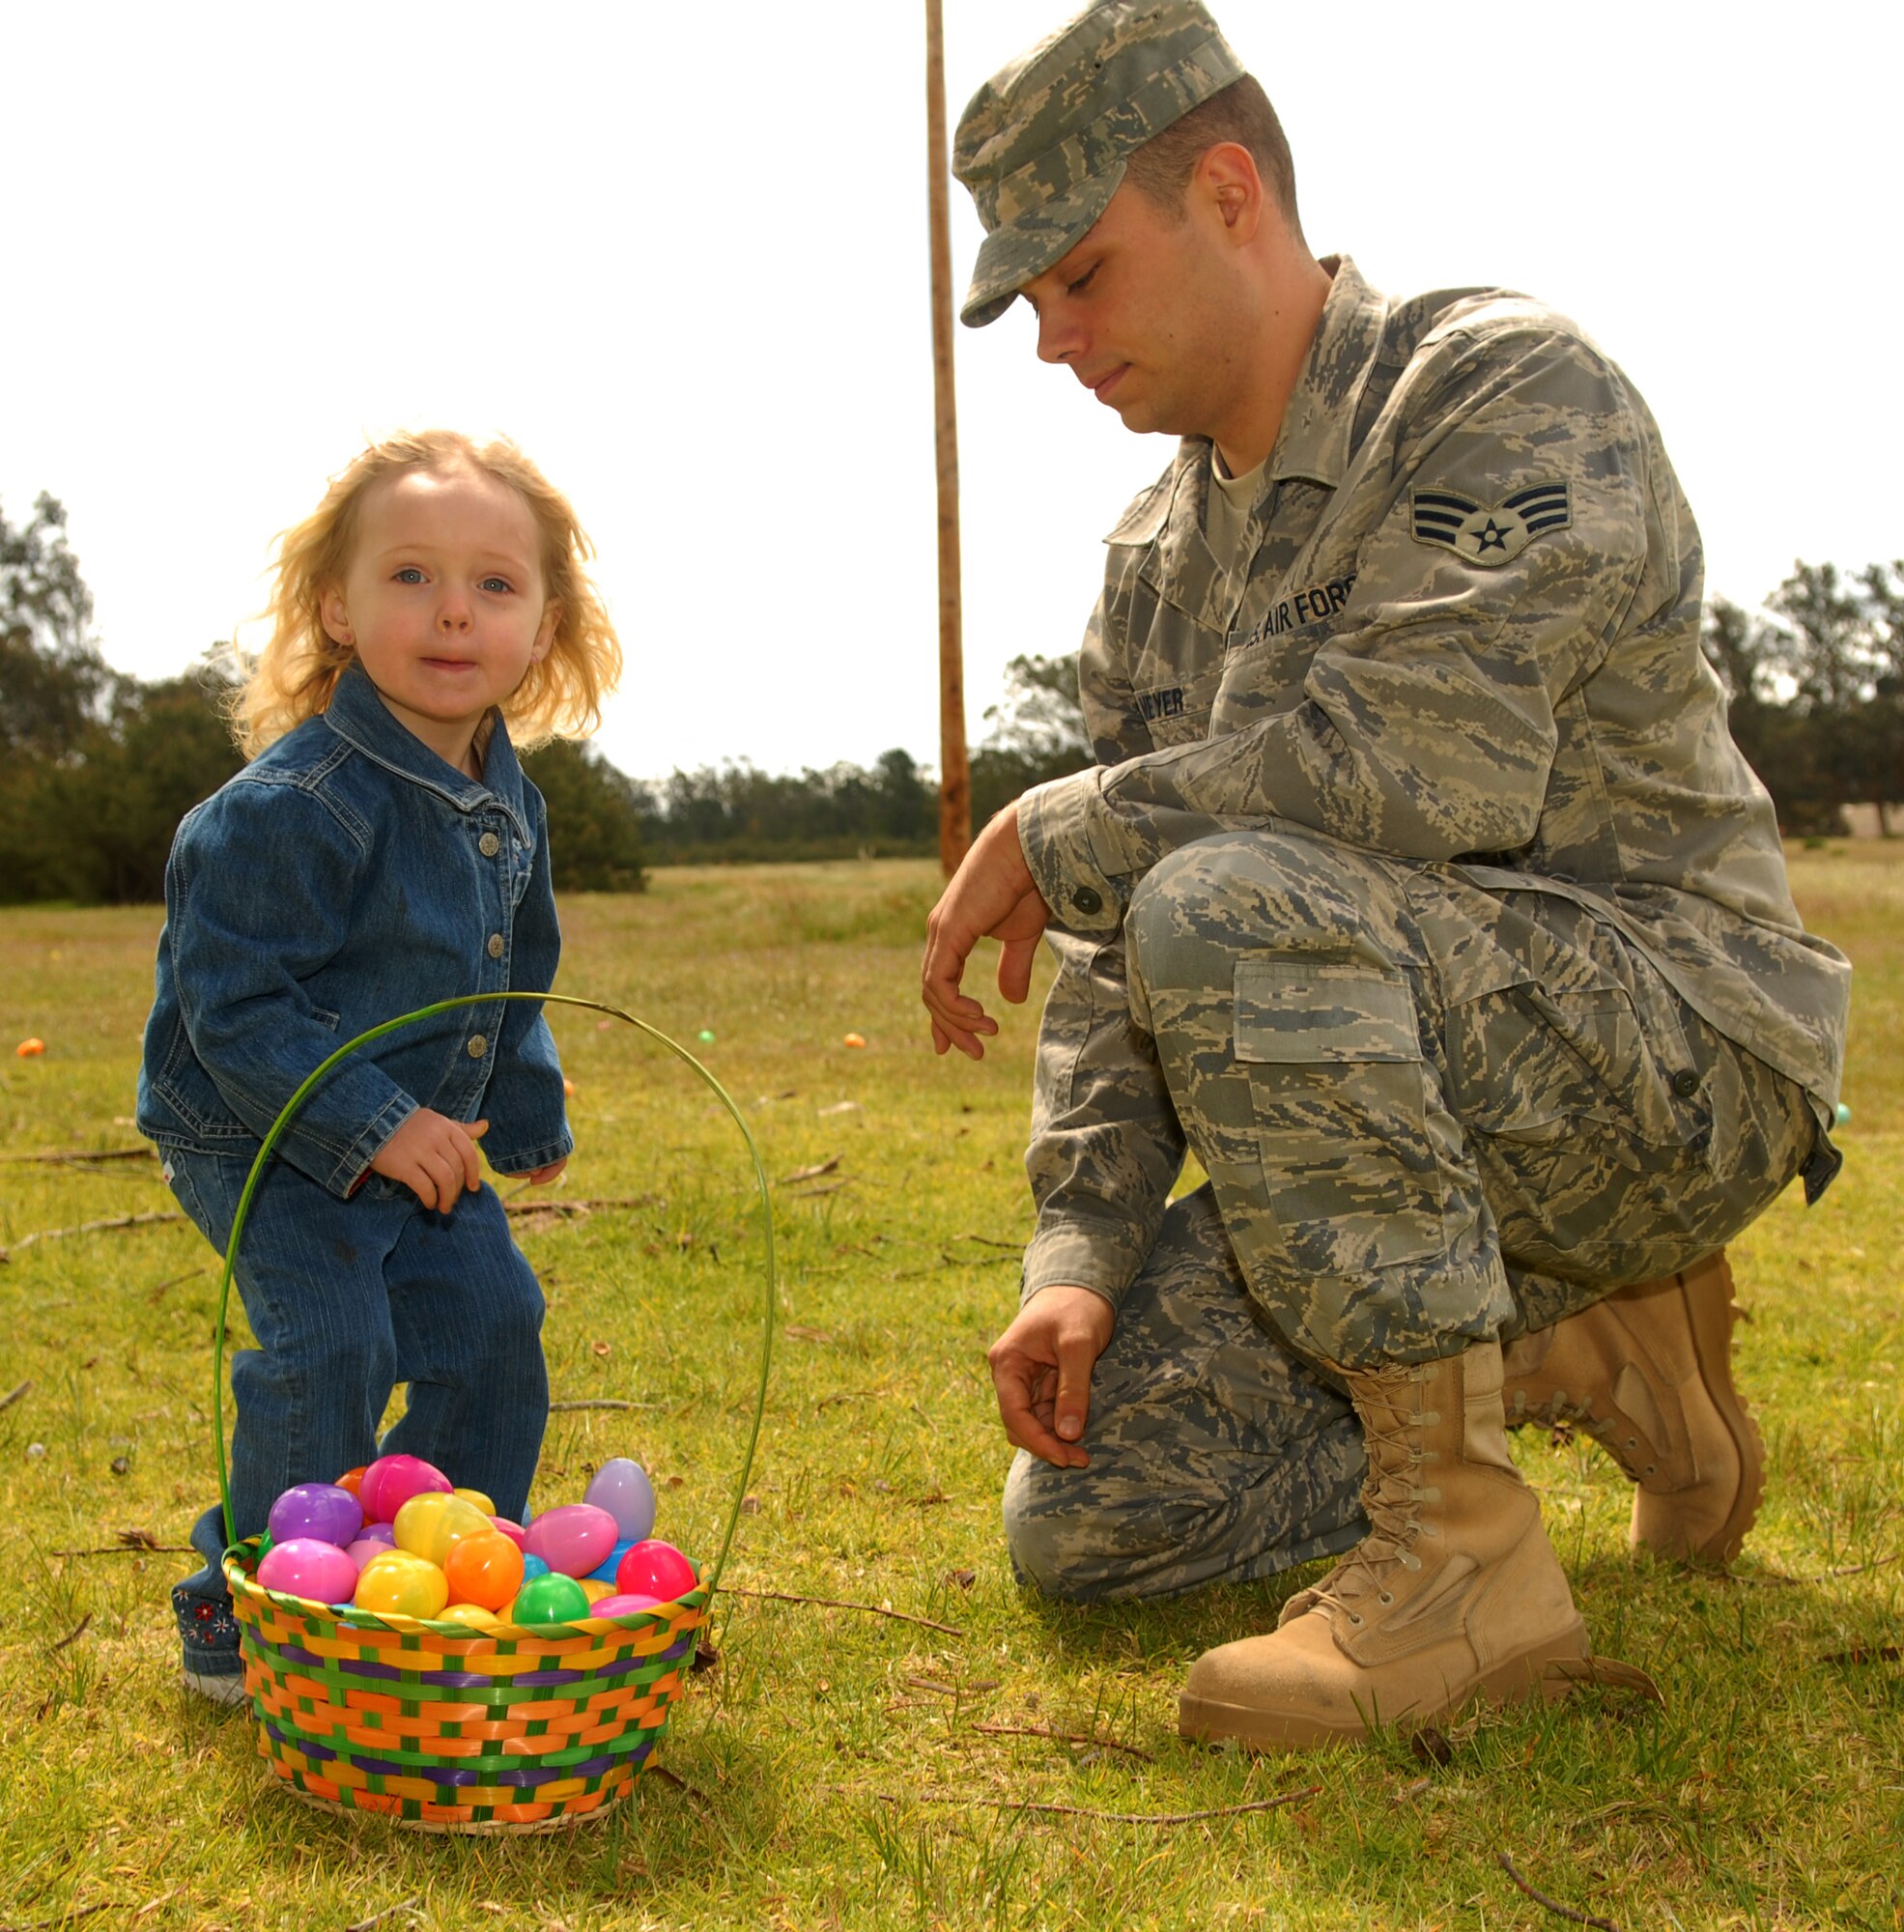 VANDENBERG AIR FORCE BASE, Calif. -- Senior Airman Matthew Meyer, a 30th Logistic Readiness Squadron computer maintainer, helps his daughter, Haley, put Easter eggs in her basket during an Easter egg hunt April 8 at Cocheo Park here. The Easter egg hunt was organized by the 30th LRS for its Airmen and their families.  (U.S. Air Force photo/Antoinette Lyons)